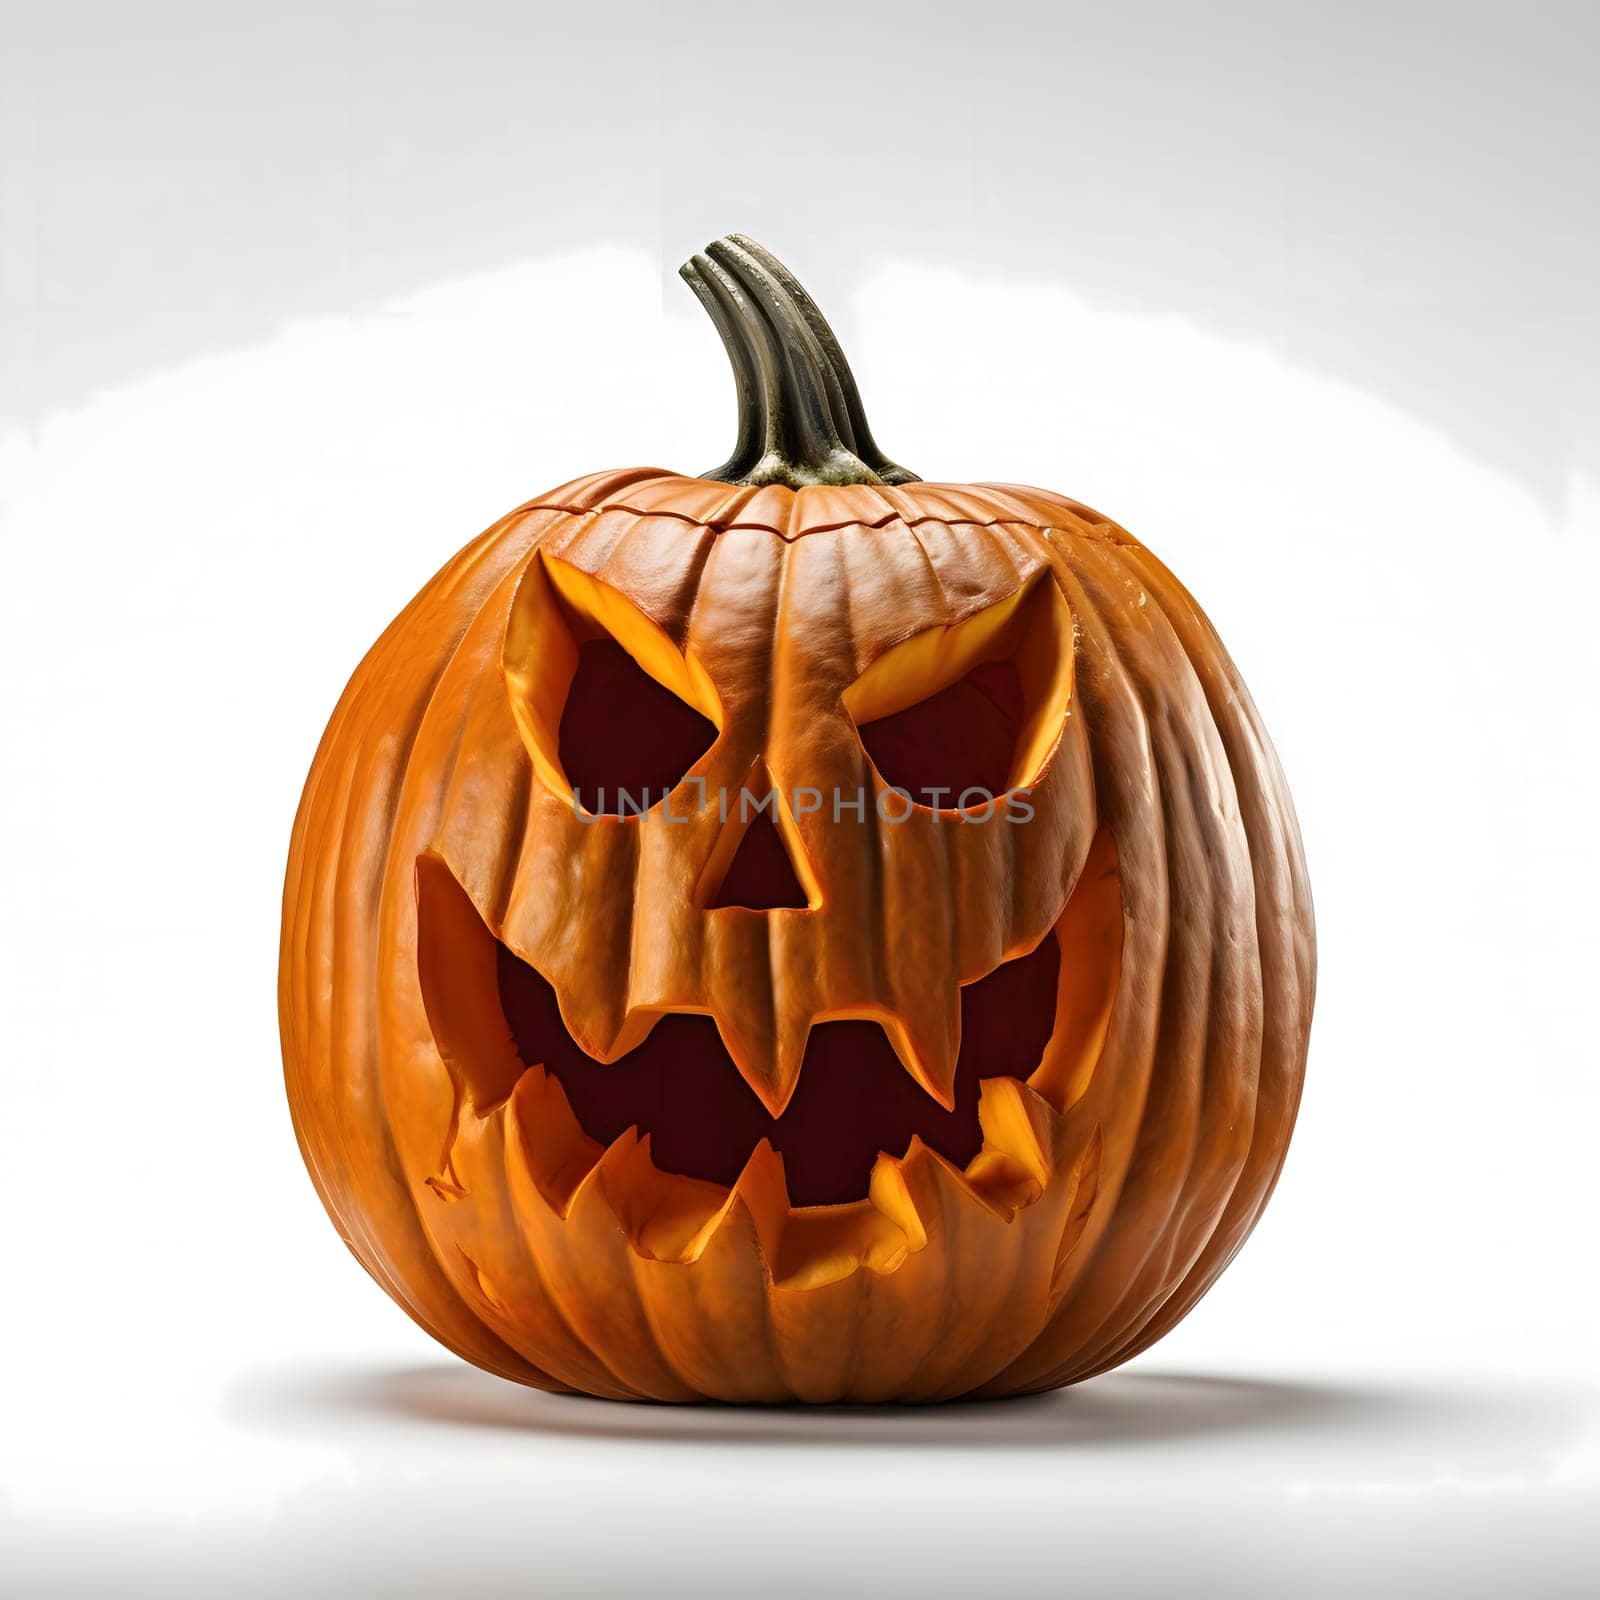 Jack-o-lantern pumpkin, Halloween image on a white isolated background. Atmosphere of darkness and fear.